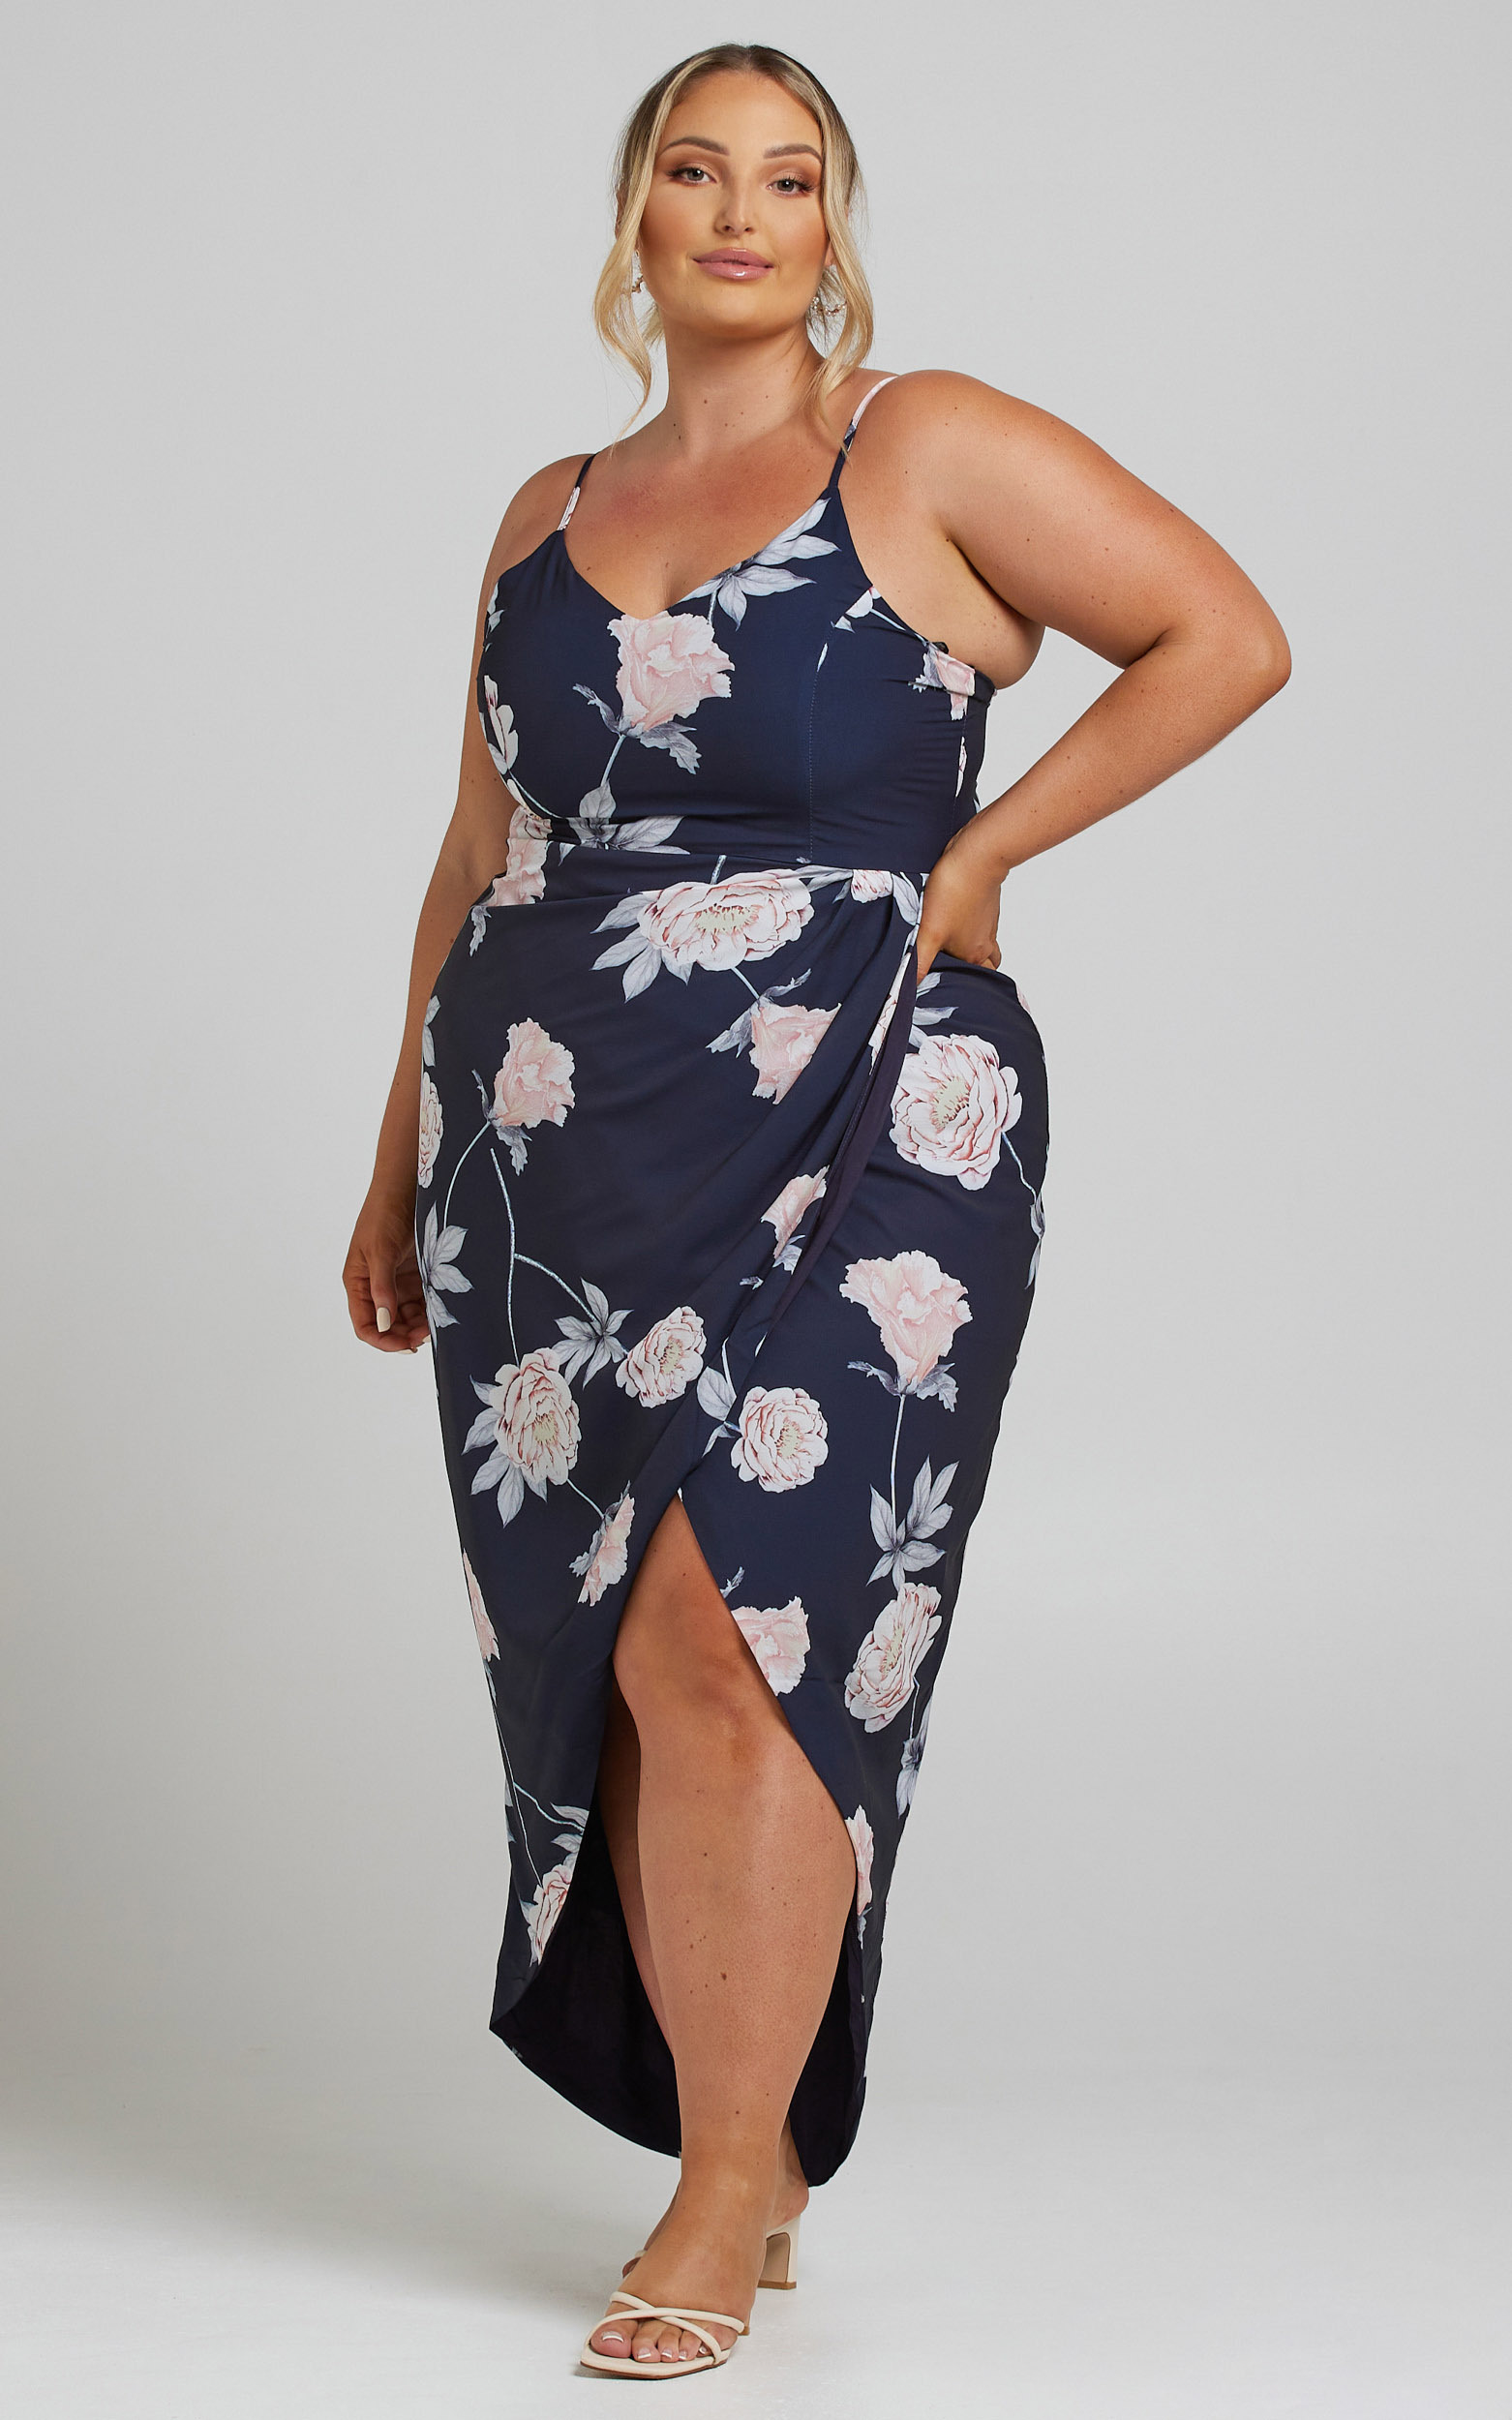 Just This Once Dress in Navy Floral - 04, NVY1, hi-res image number null